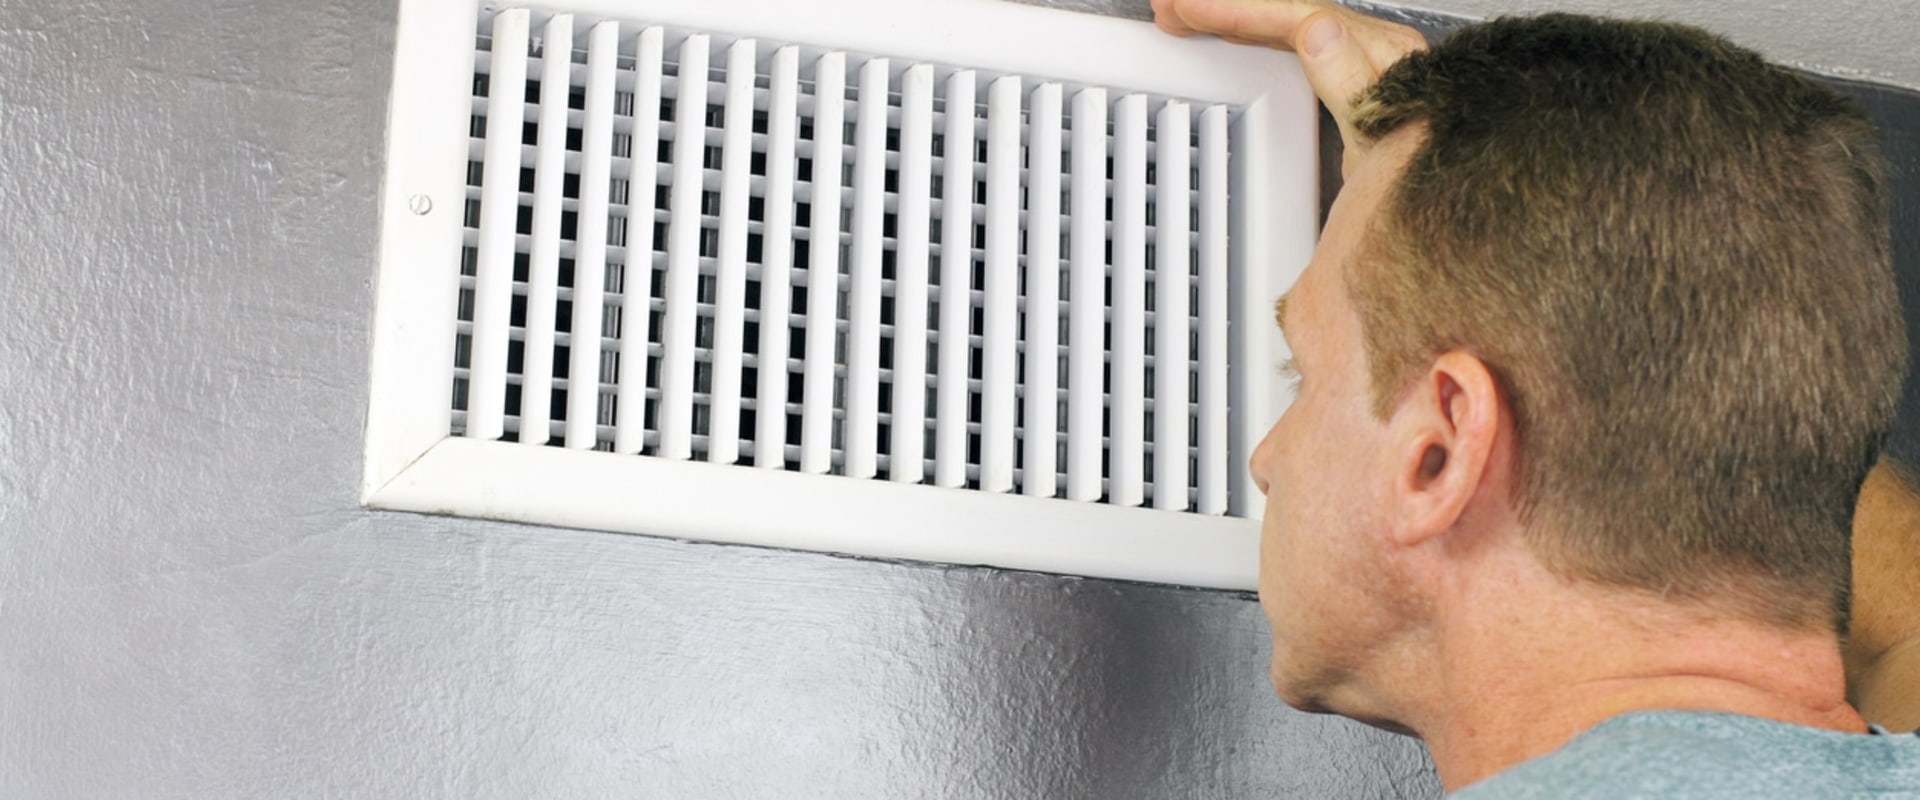 What Type of Materials are Used for Professional Air Duct Cleaning Services?